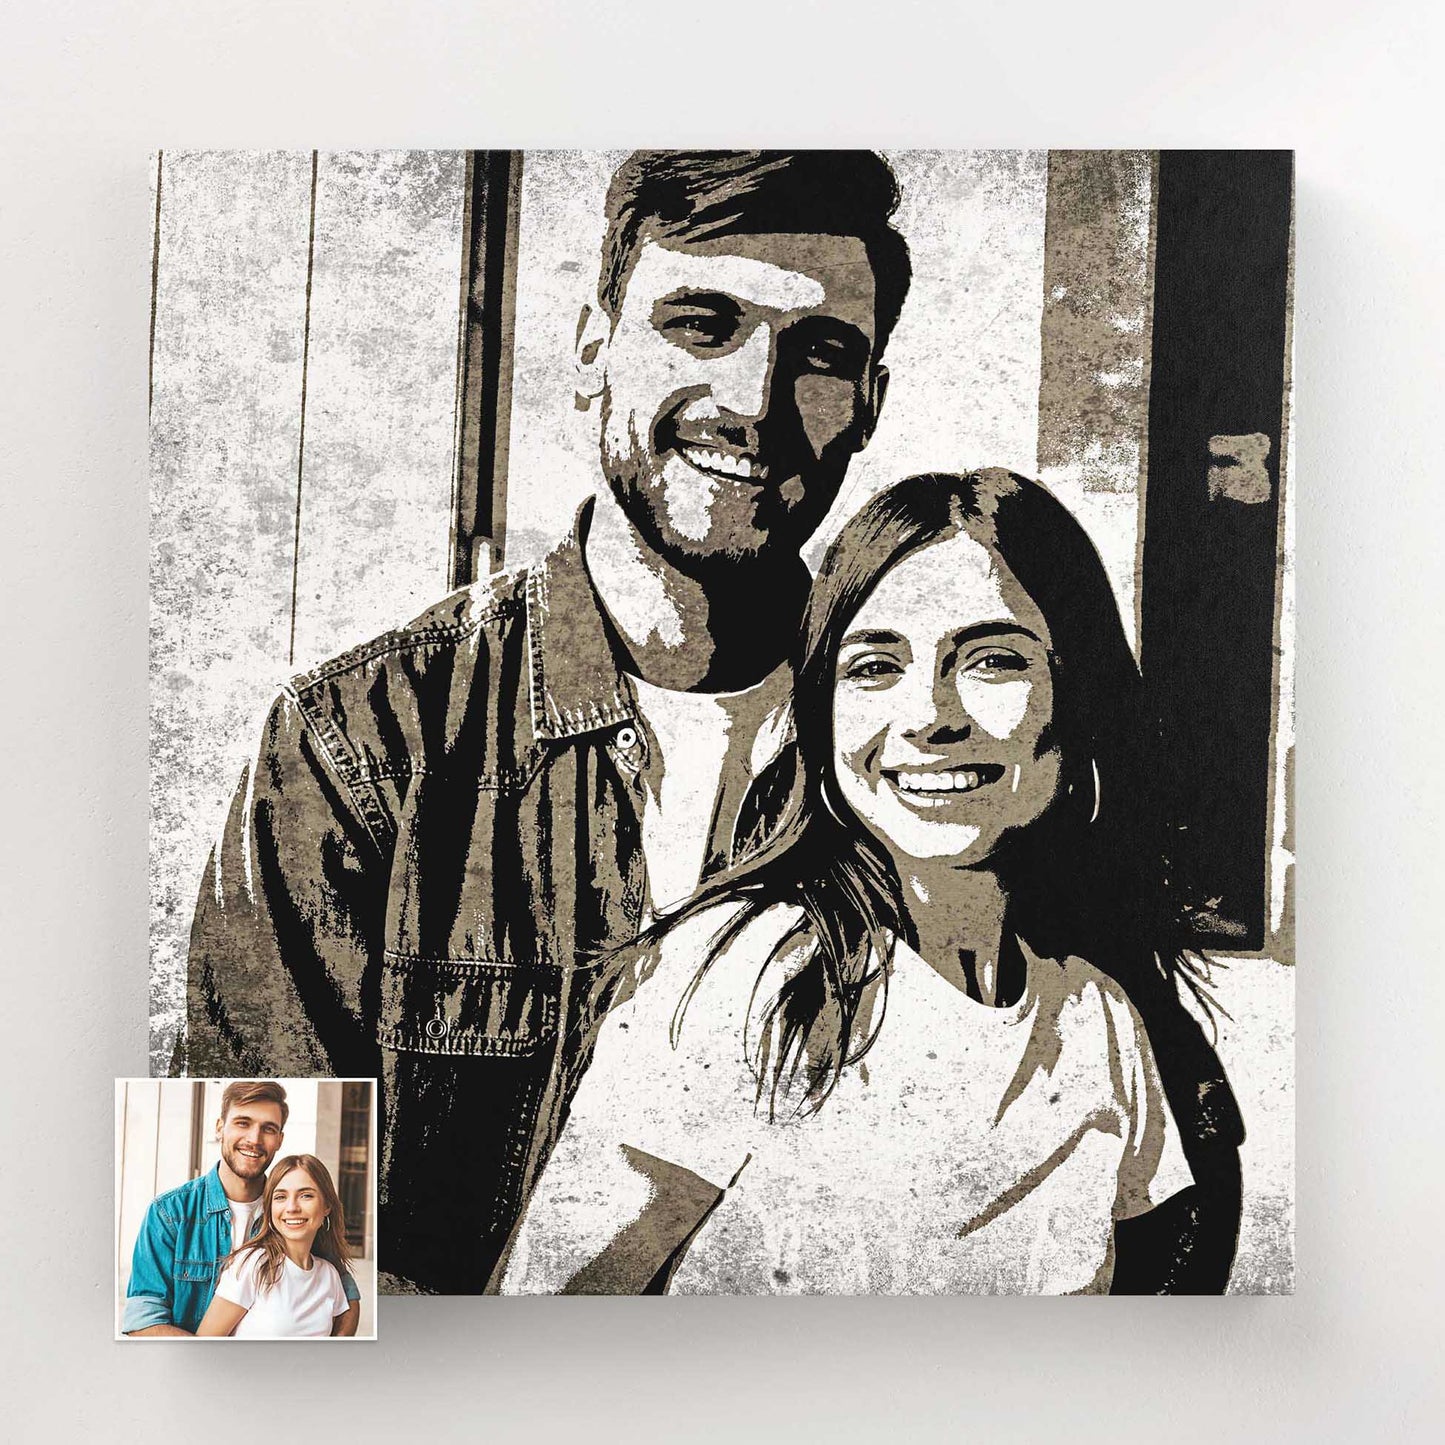 Discover the allure of minimalism with our Personalised Black & White Urban Street Art Canvas. The simple yet impactful design brings a sense of sophistication to any space. Whether as a gift or for your own collection